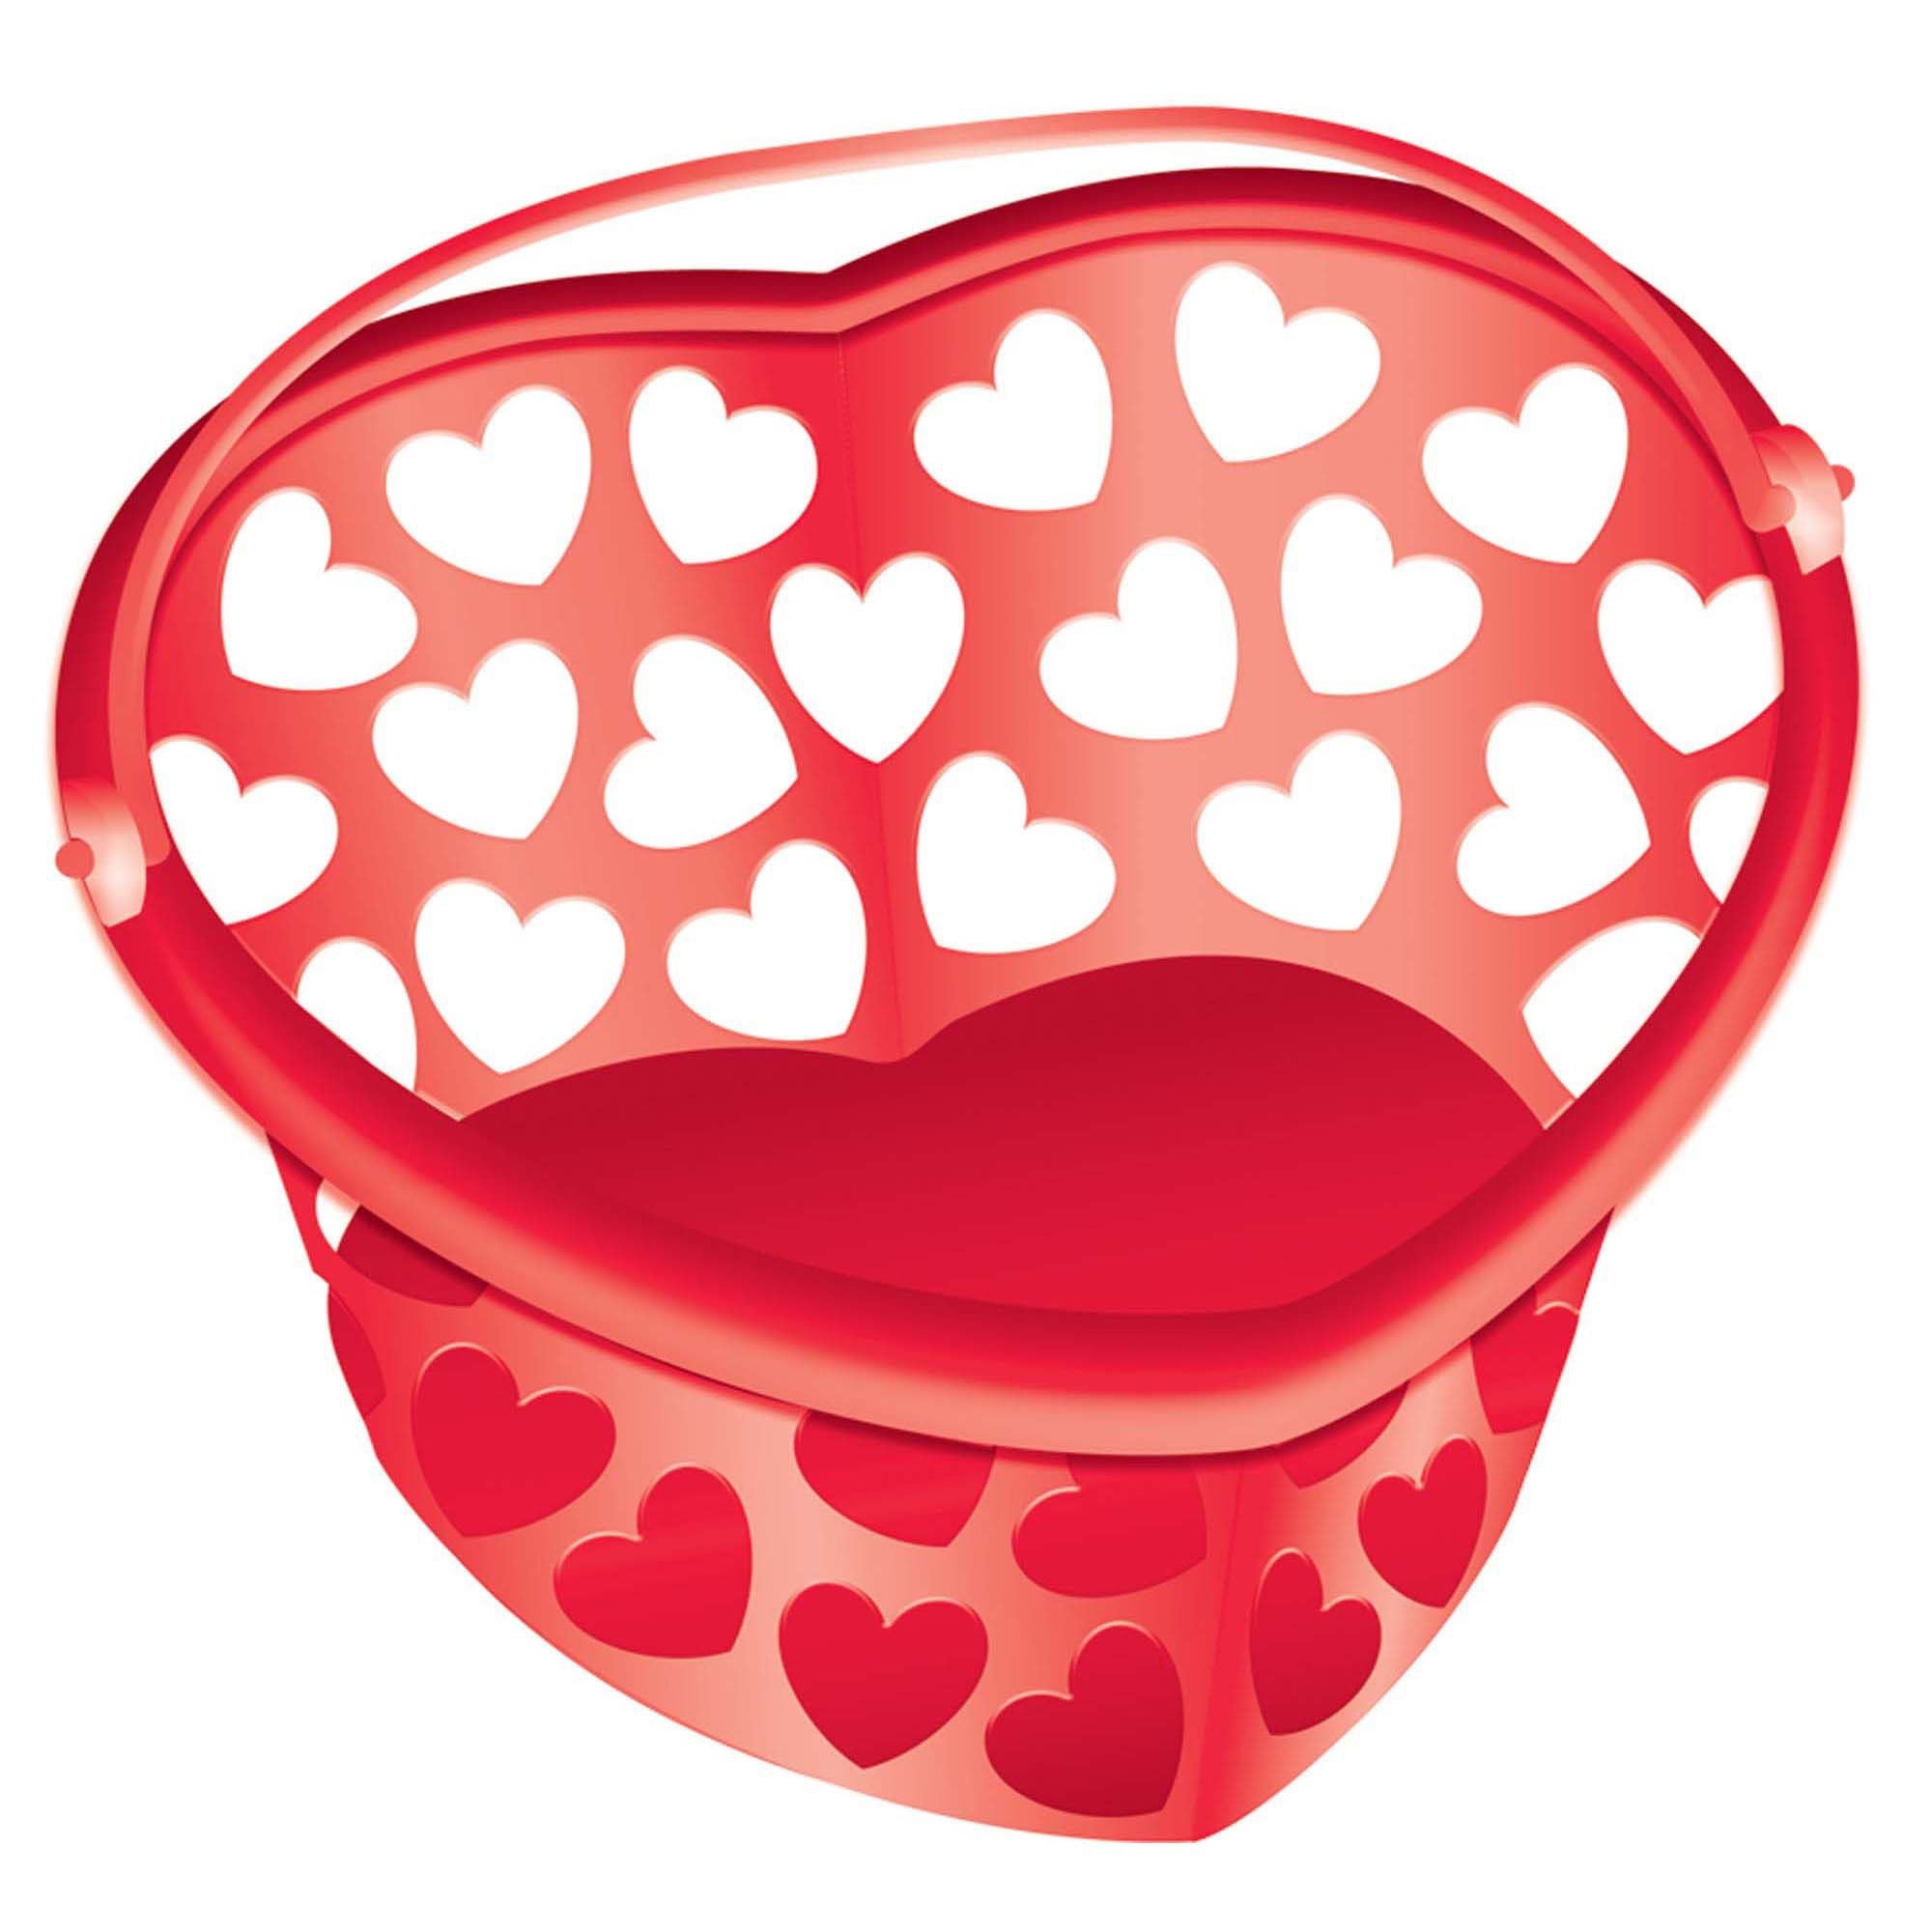 Red Heart Shaped Plastic Container | Valentine's Day